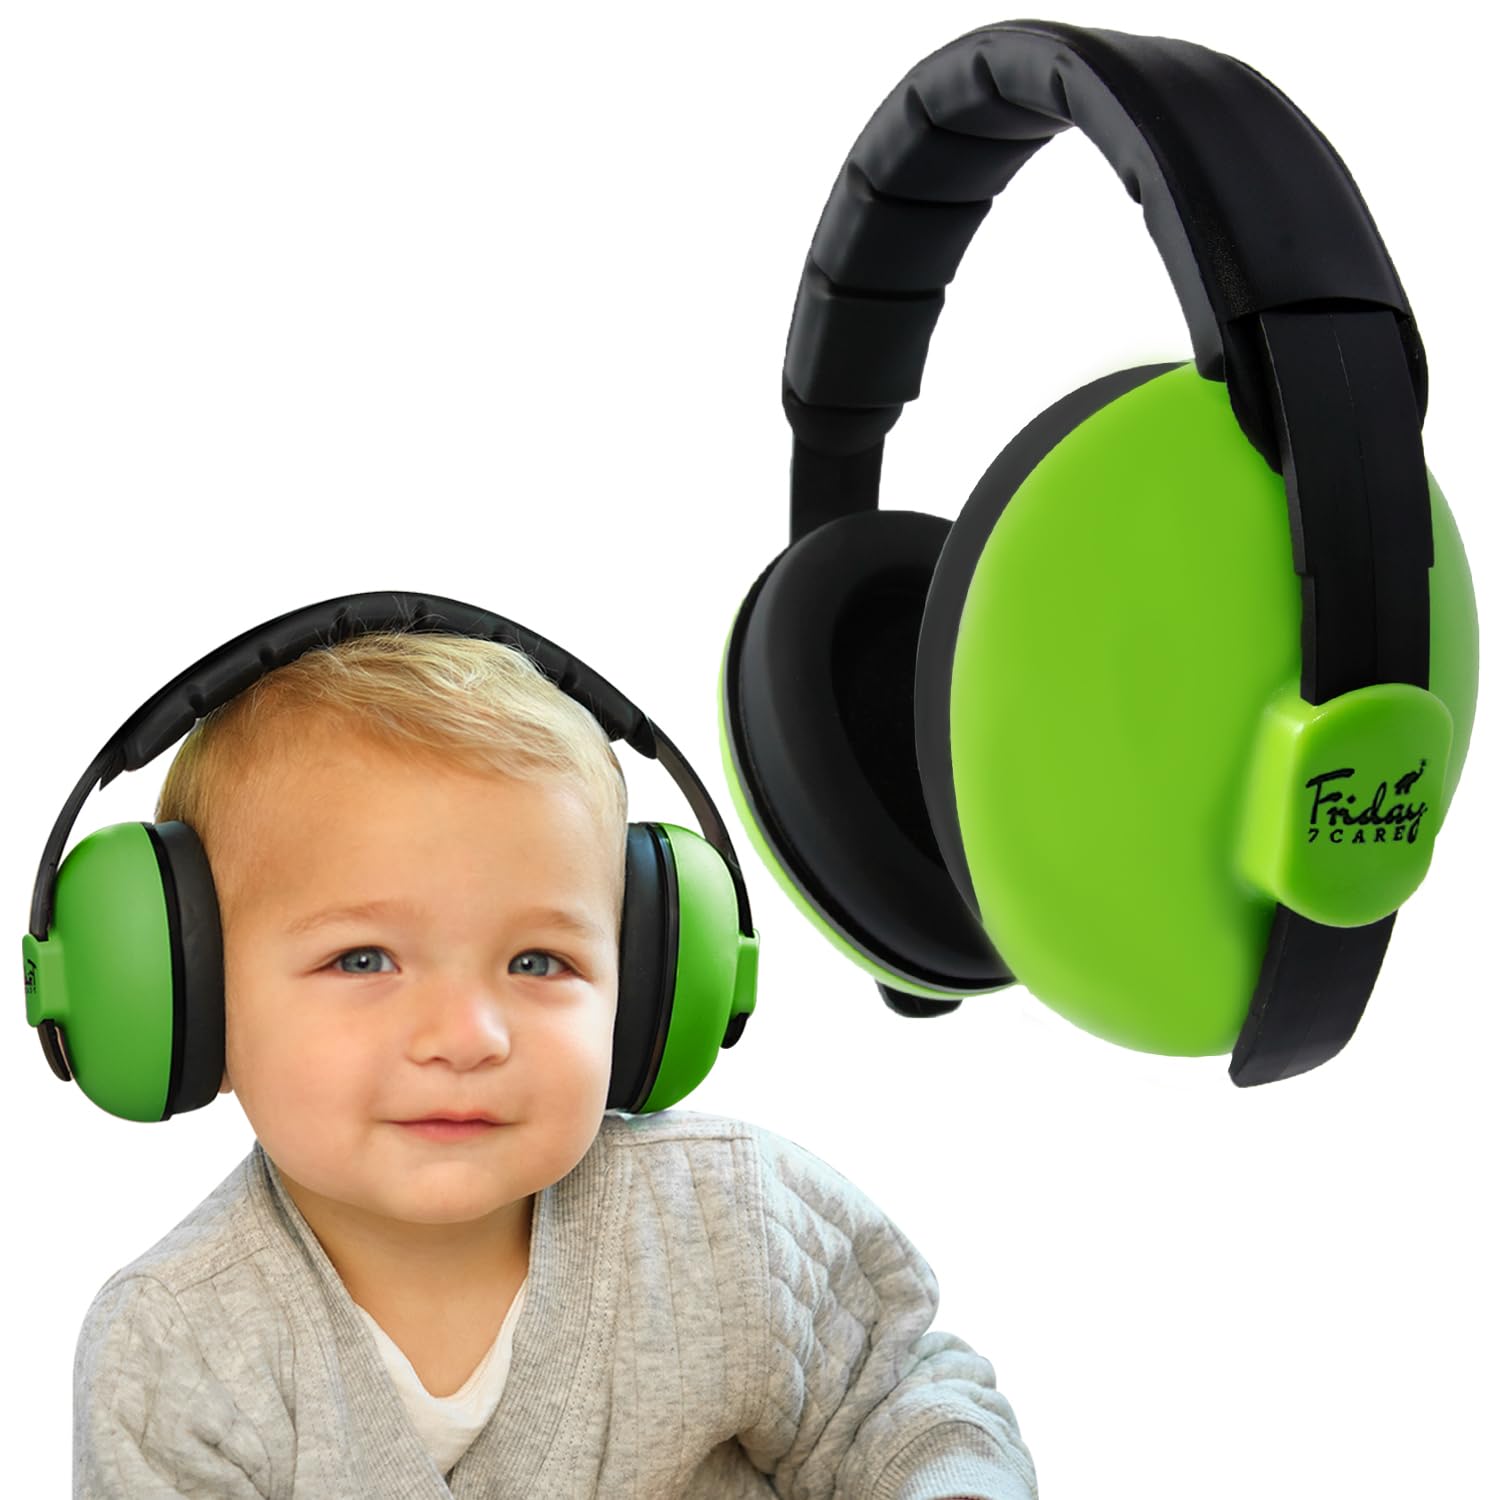 https://thepintopony.com/wp-content/uploads/2024/04/1712080478_248_Baby-Headphones-for-Noise-Free-Peace-amp-Ear-Protection.jpg